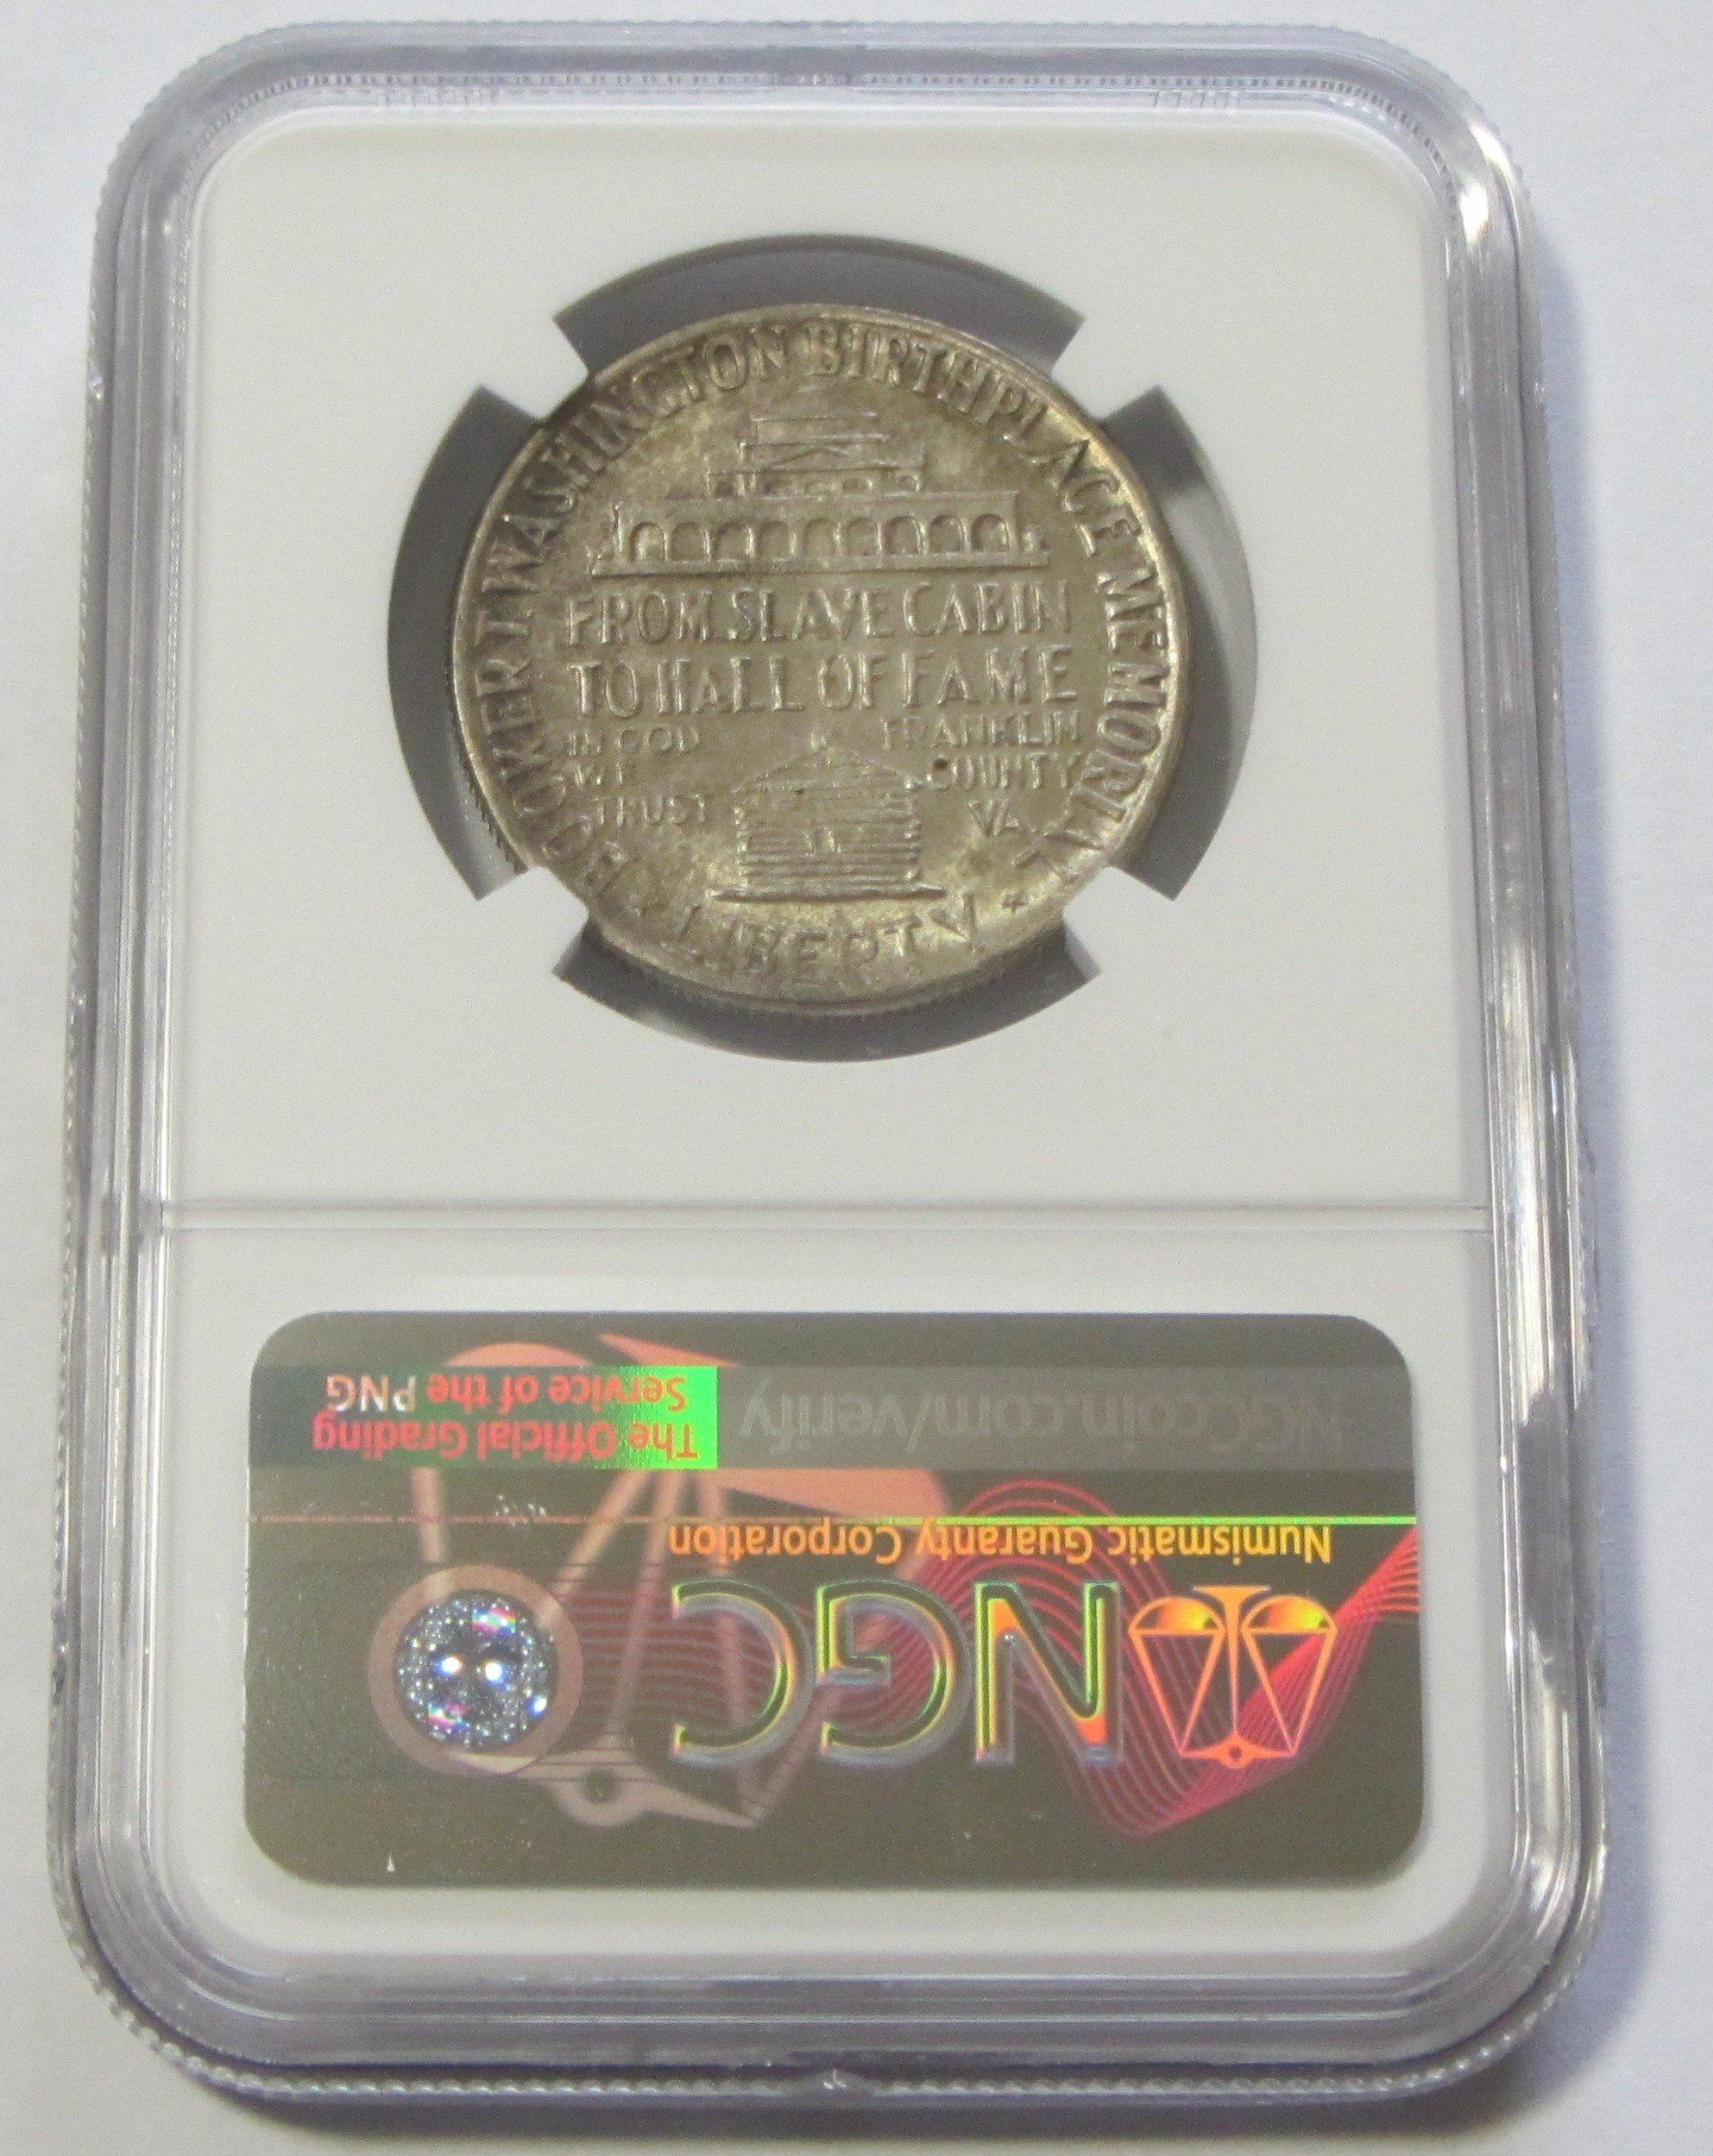 1951 BTW SILVER COMMEMORATIVE NGC MS 64